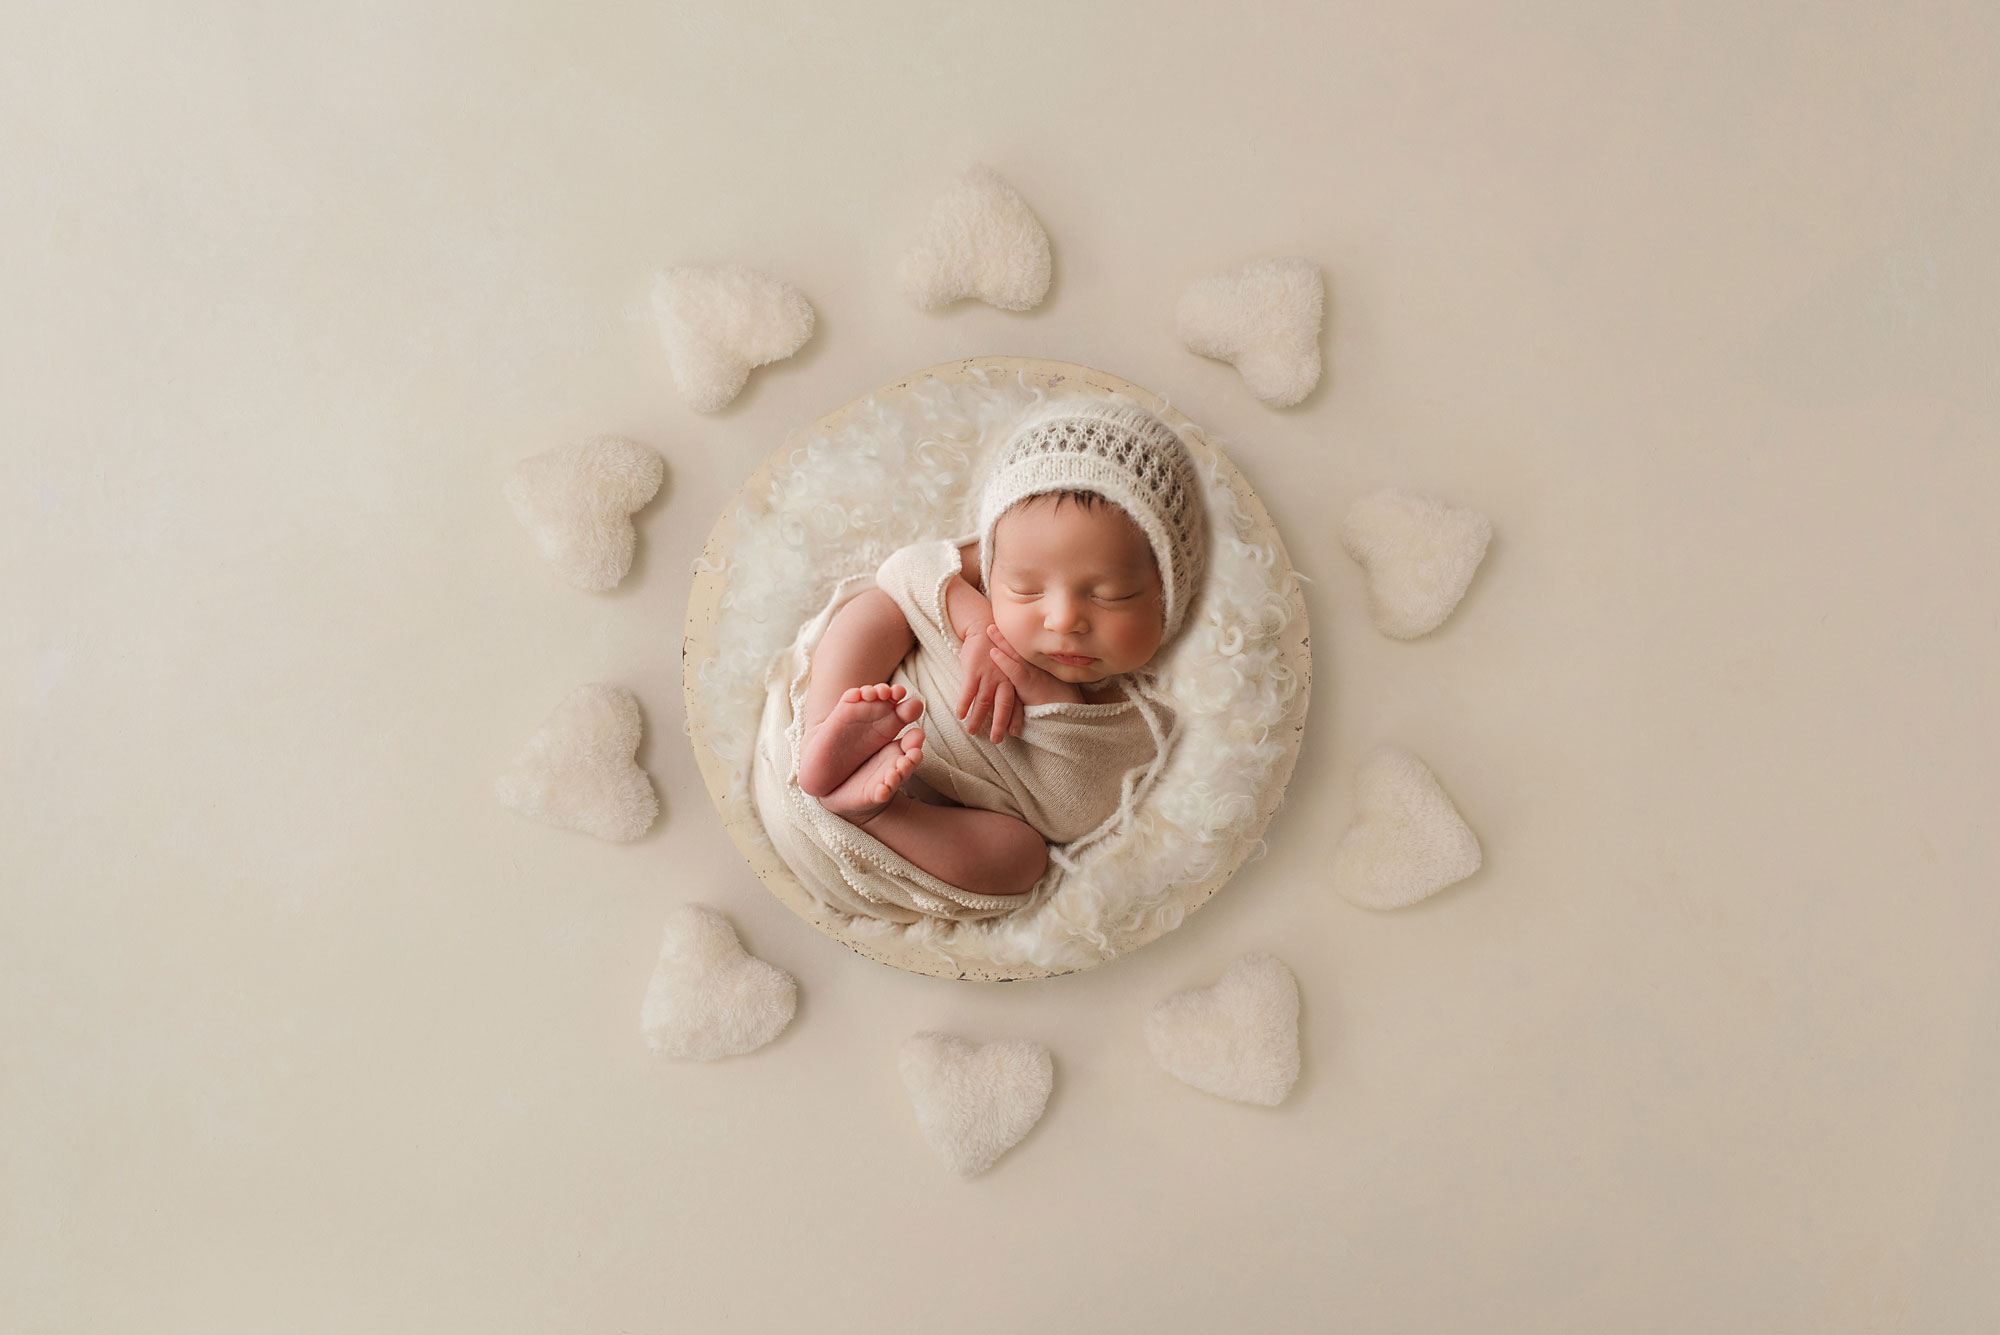 digital composite of a newborn baby in a basket with white hearts around 